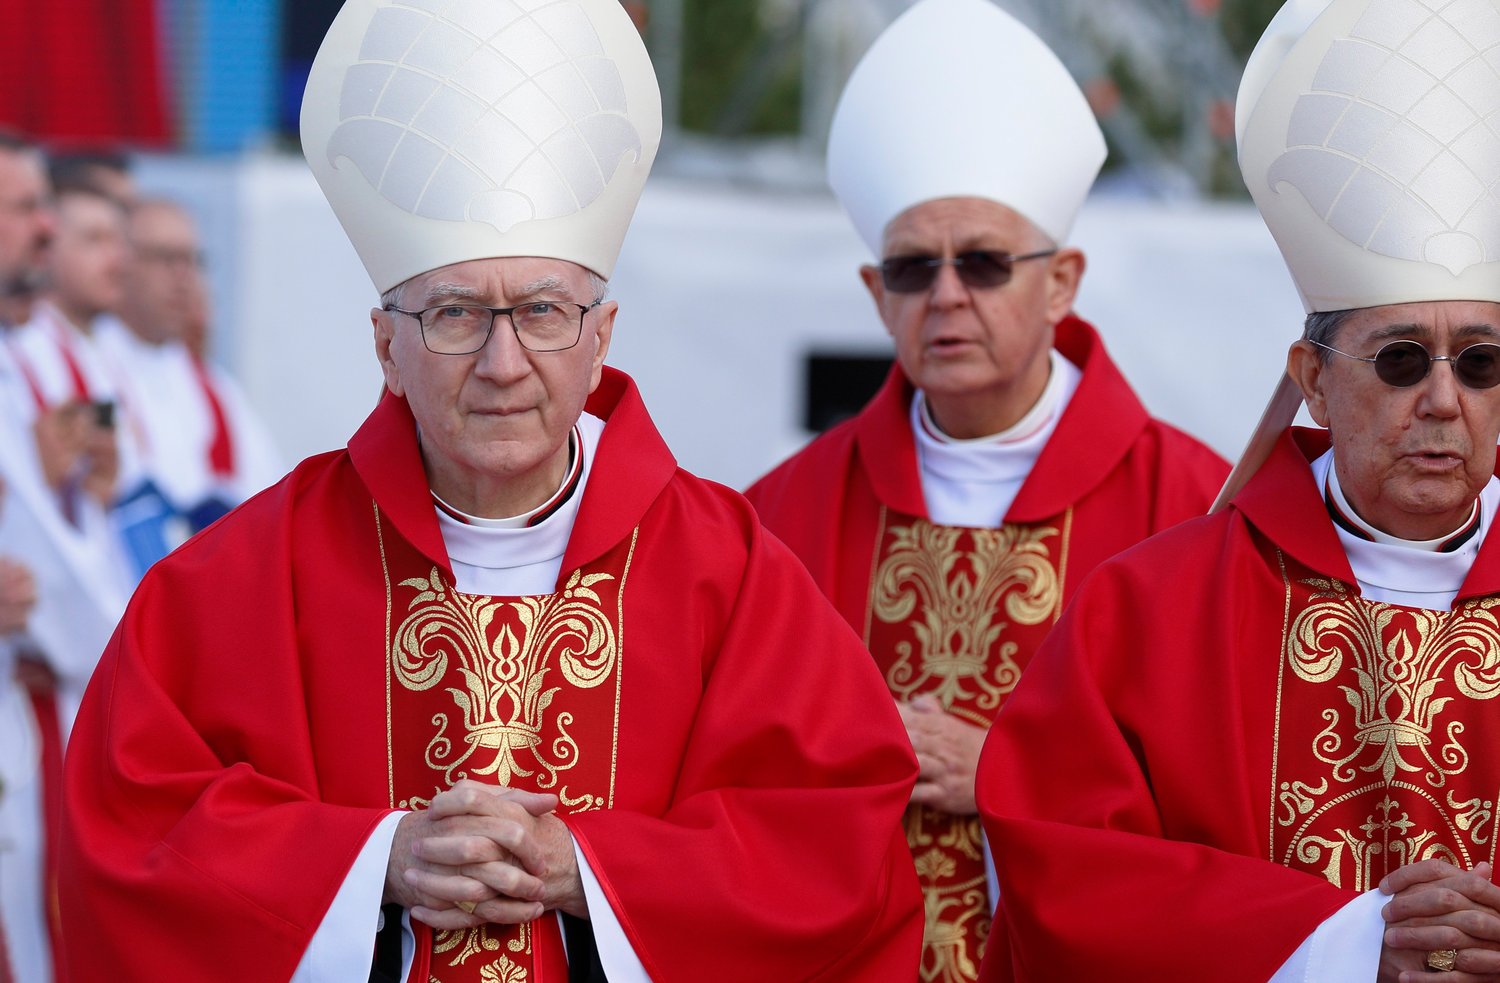 Cardinal Pietro Parolin, Vatican secretary of state, left, and Cardinal Miguel Angel Ayuso Guixot, president of the Dicastery for Interreligious Dialogue, right, arrive in procession for Pope Francis’ Mass at the Expo grounds in Nur-Sultan, Kazakhstan, Sept. 14.